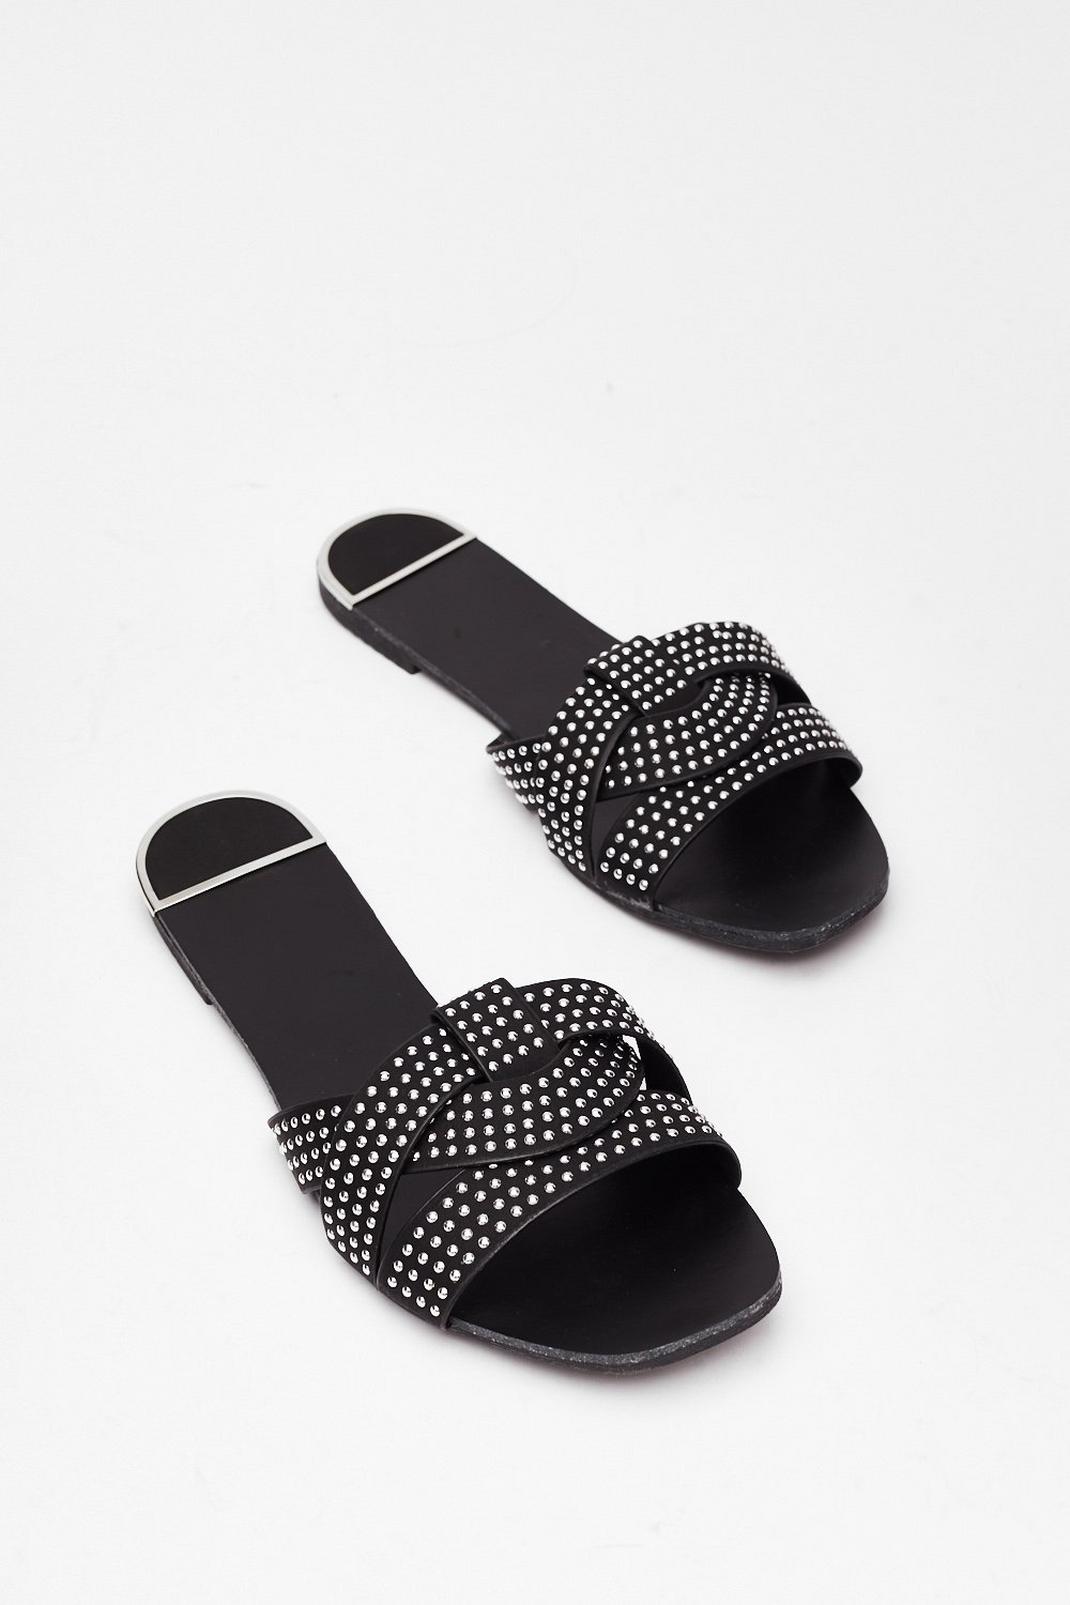 Stud Never Look Back Faux Leather Flat Sandals | Nasty Gal